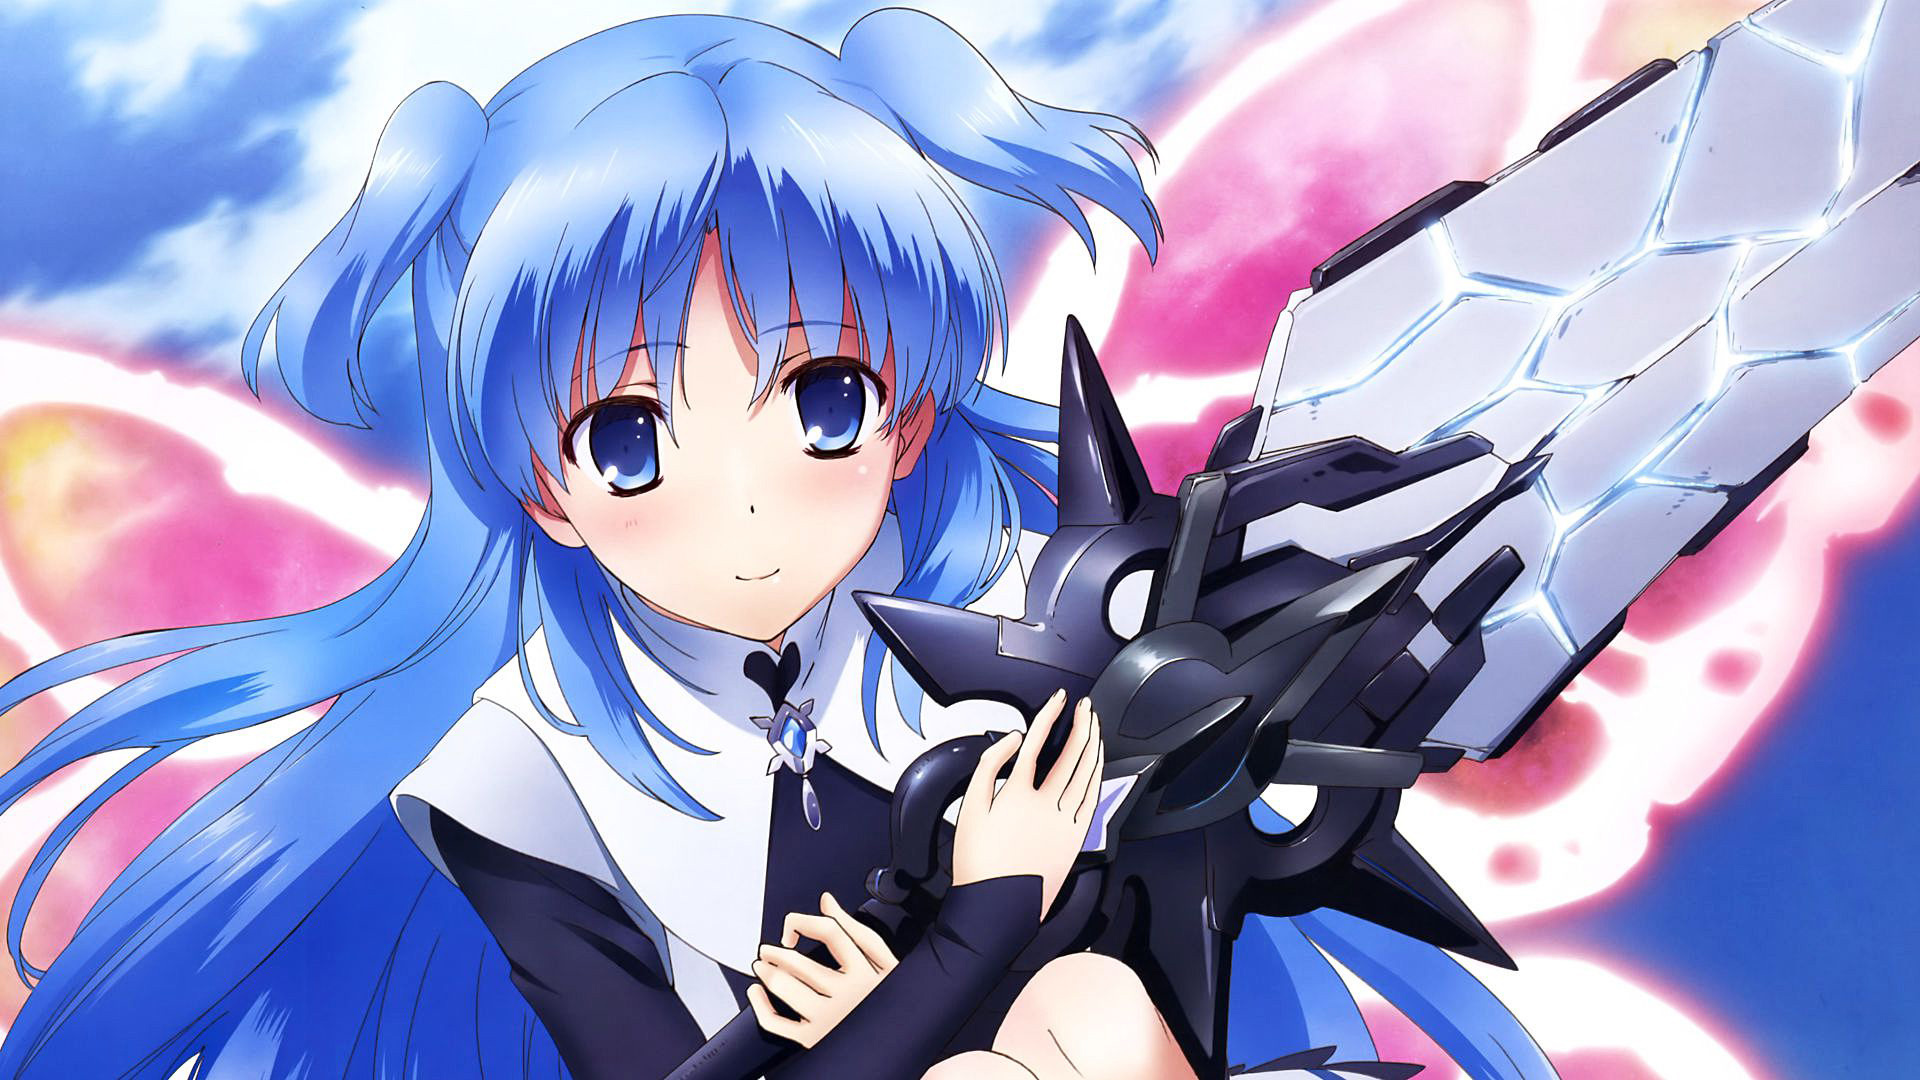 WorldEnd Anime, Desuka wallpapers, HD images, Wallpaper collection, 1920x1080 Full HD Desktop